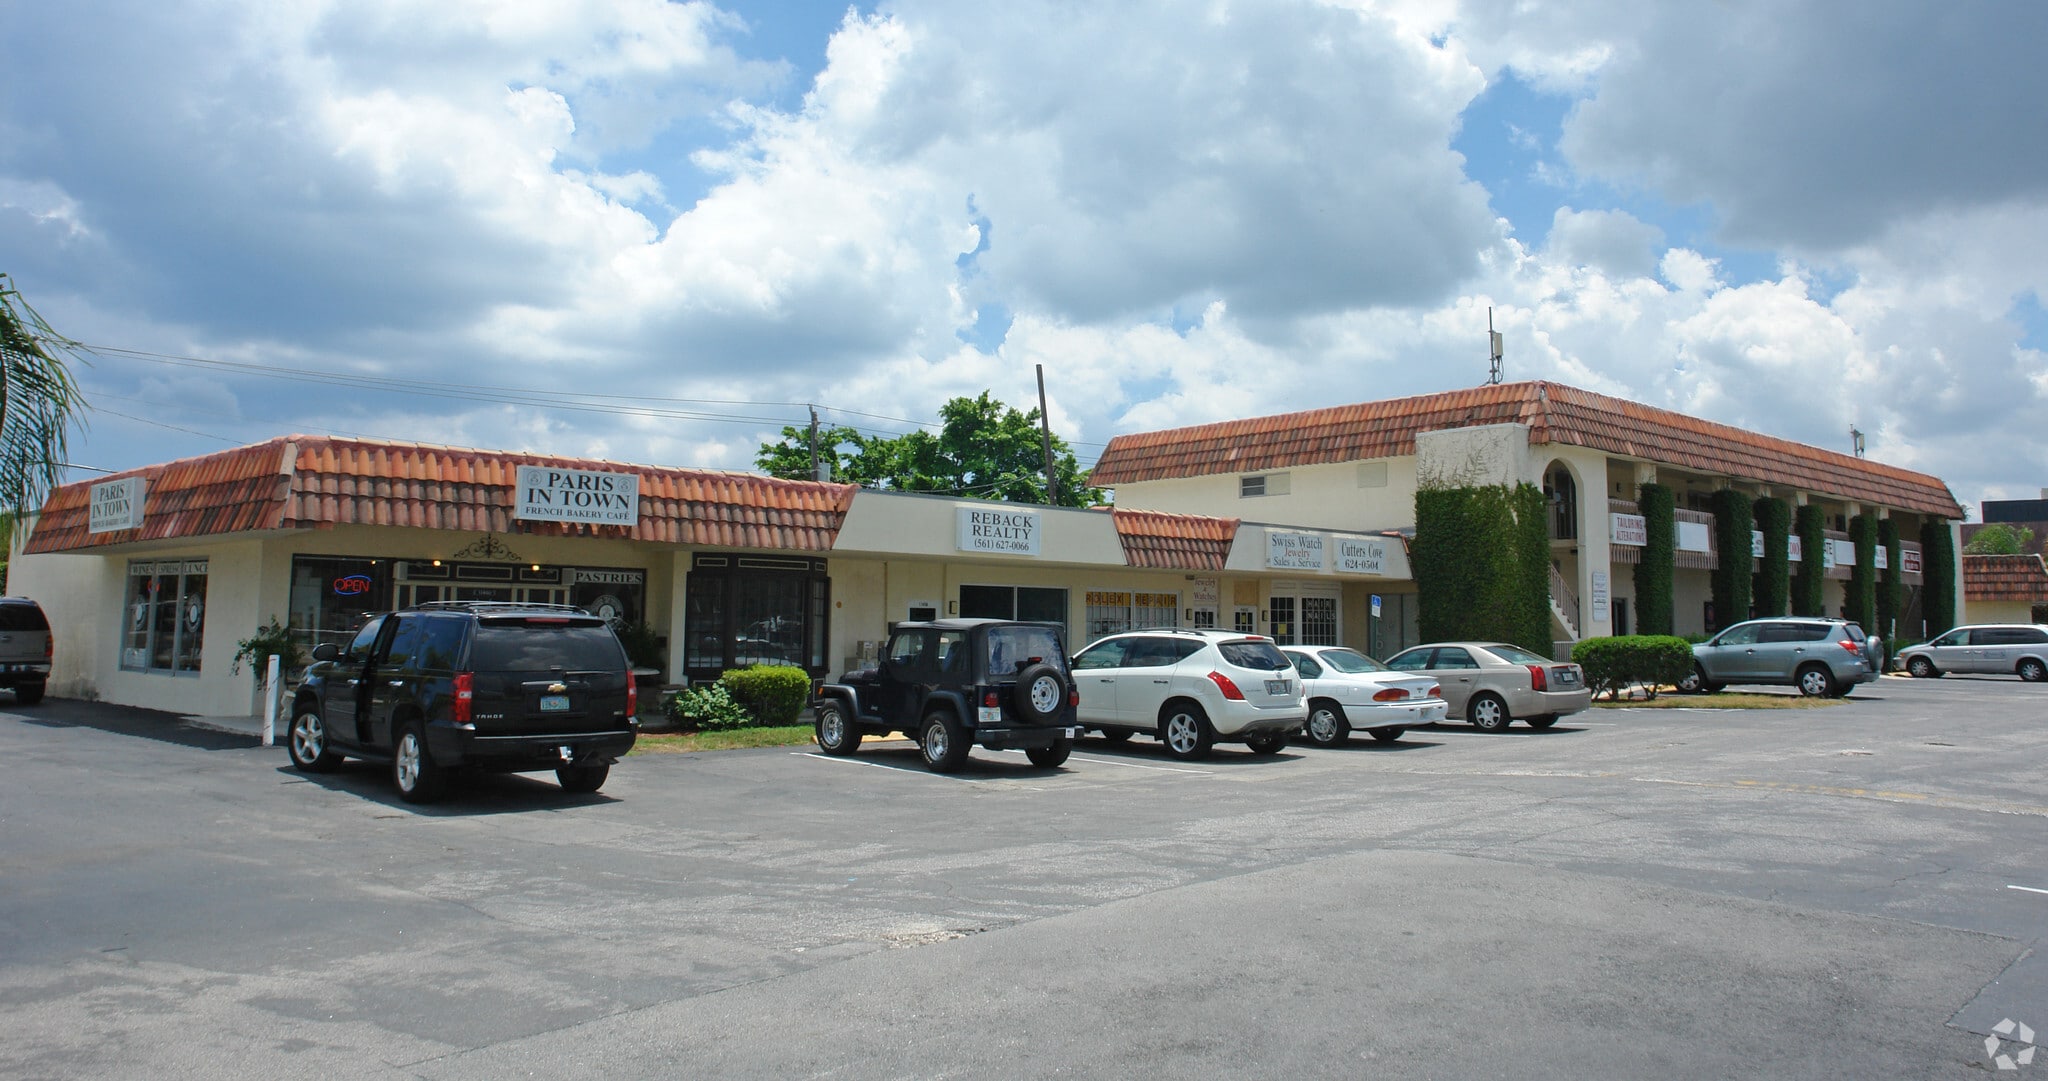 11402-11460 US Highway 1, Palm Beach Gardens, FL for lease Building Photo- Image 1 of 7